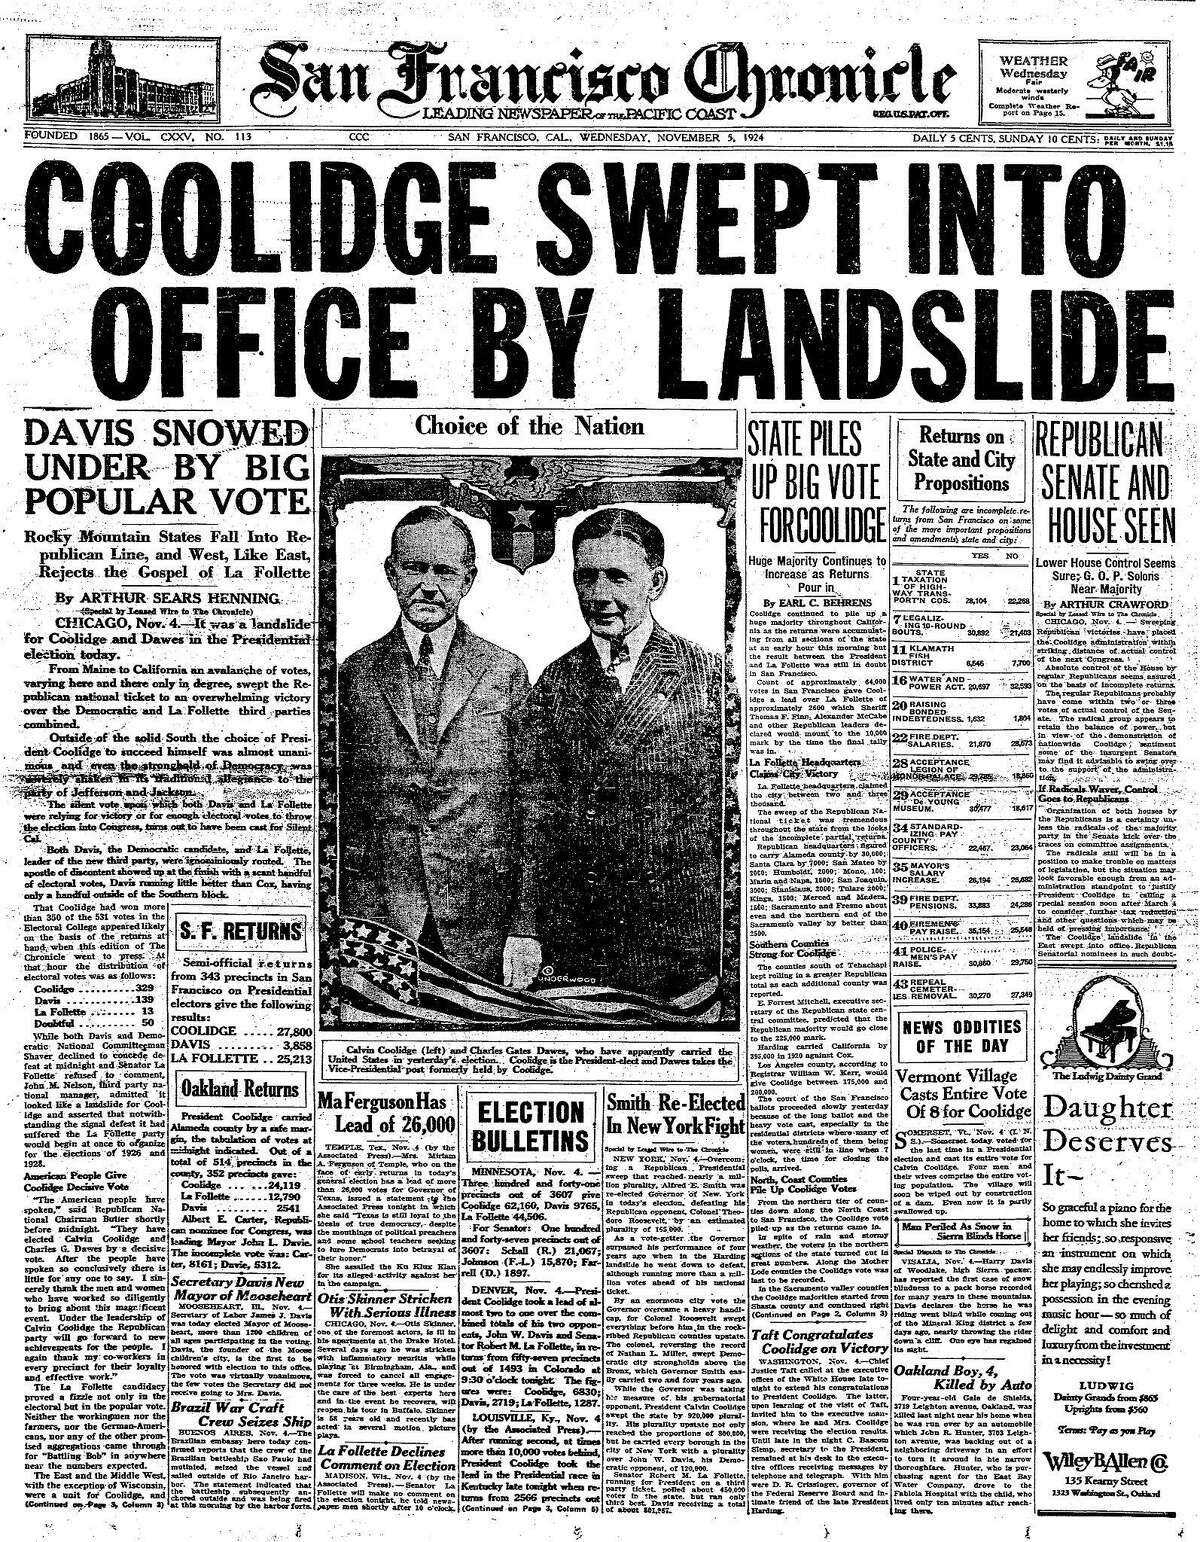 Calvin Coolidge won the 1924 presidential election in a landslide, but in San Francisco third-party candidate Robert La Follette of the Progressive Party would do well, finishing second far ahead of Democratic candidate